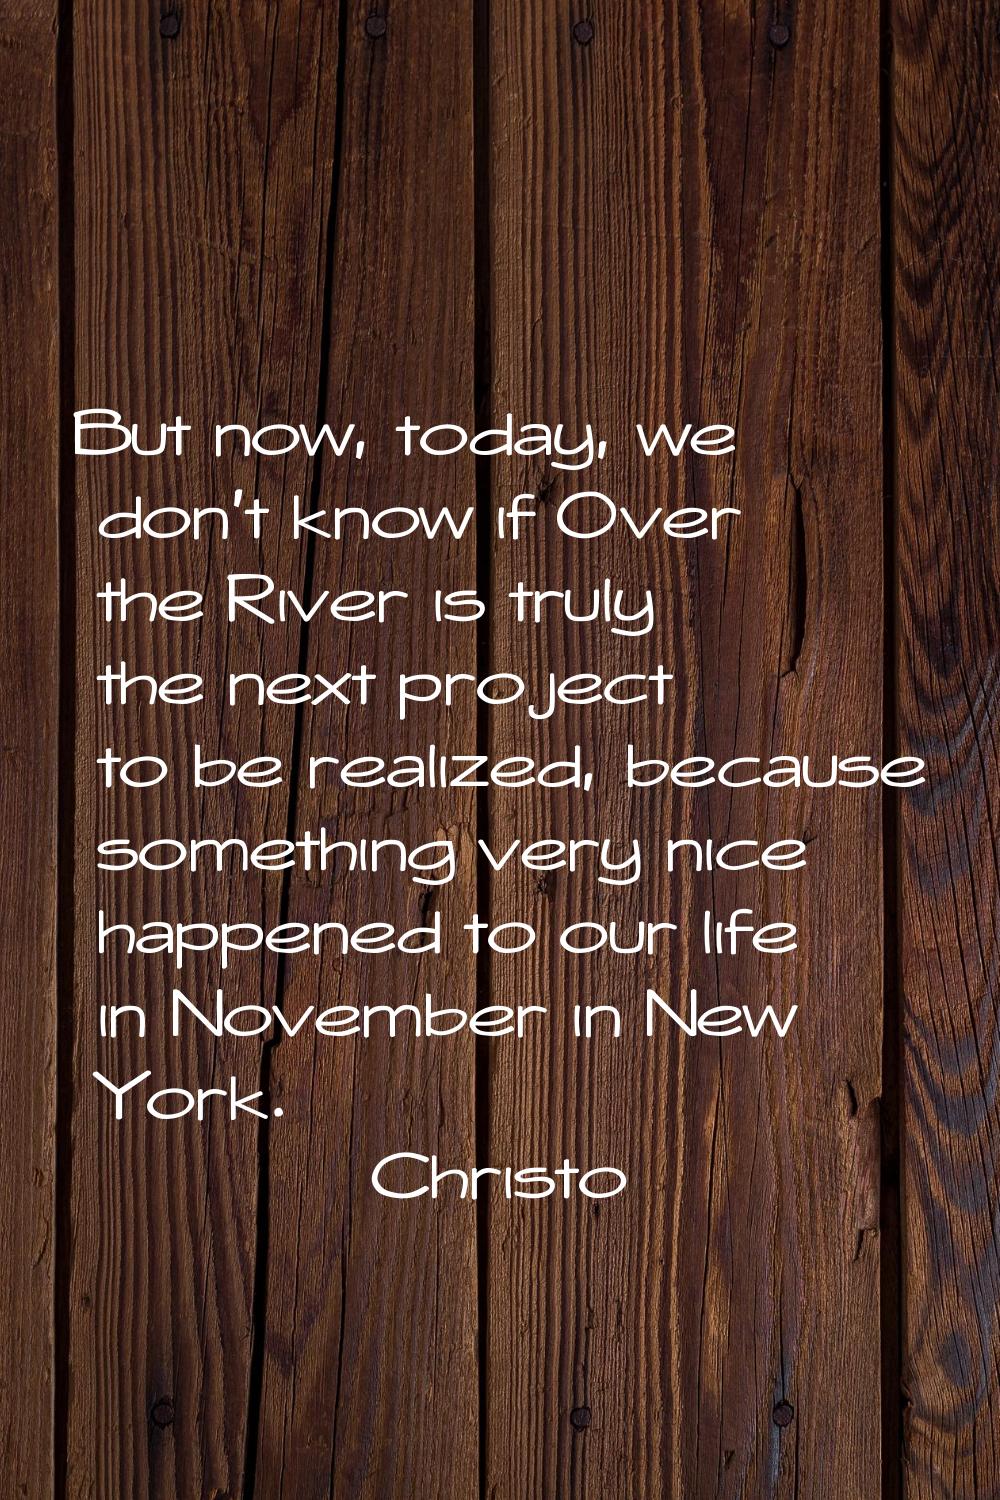 But now, today, we don't know if Over the River is truly the next project to be realized, because s